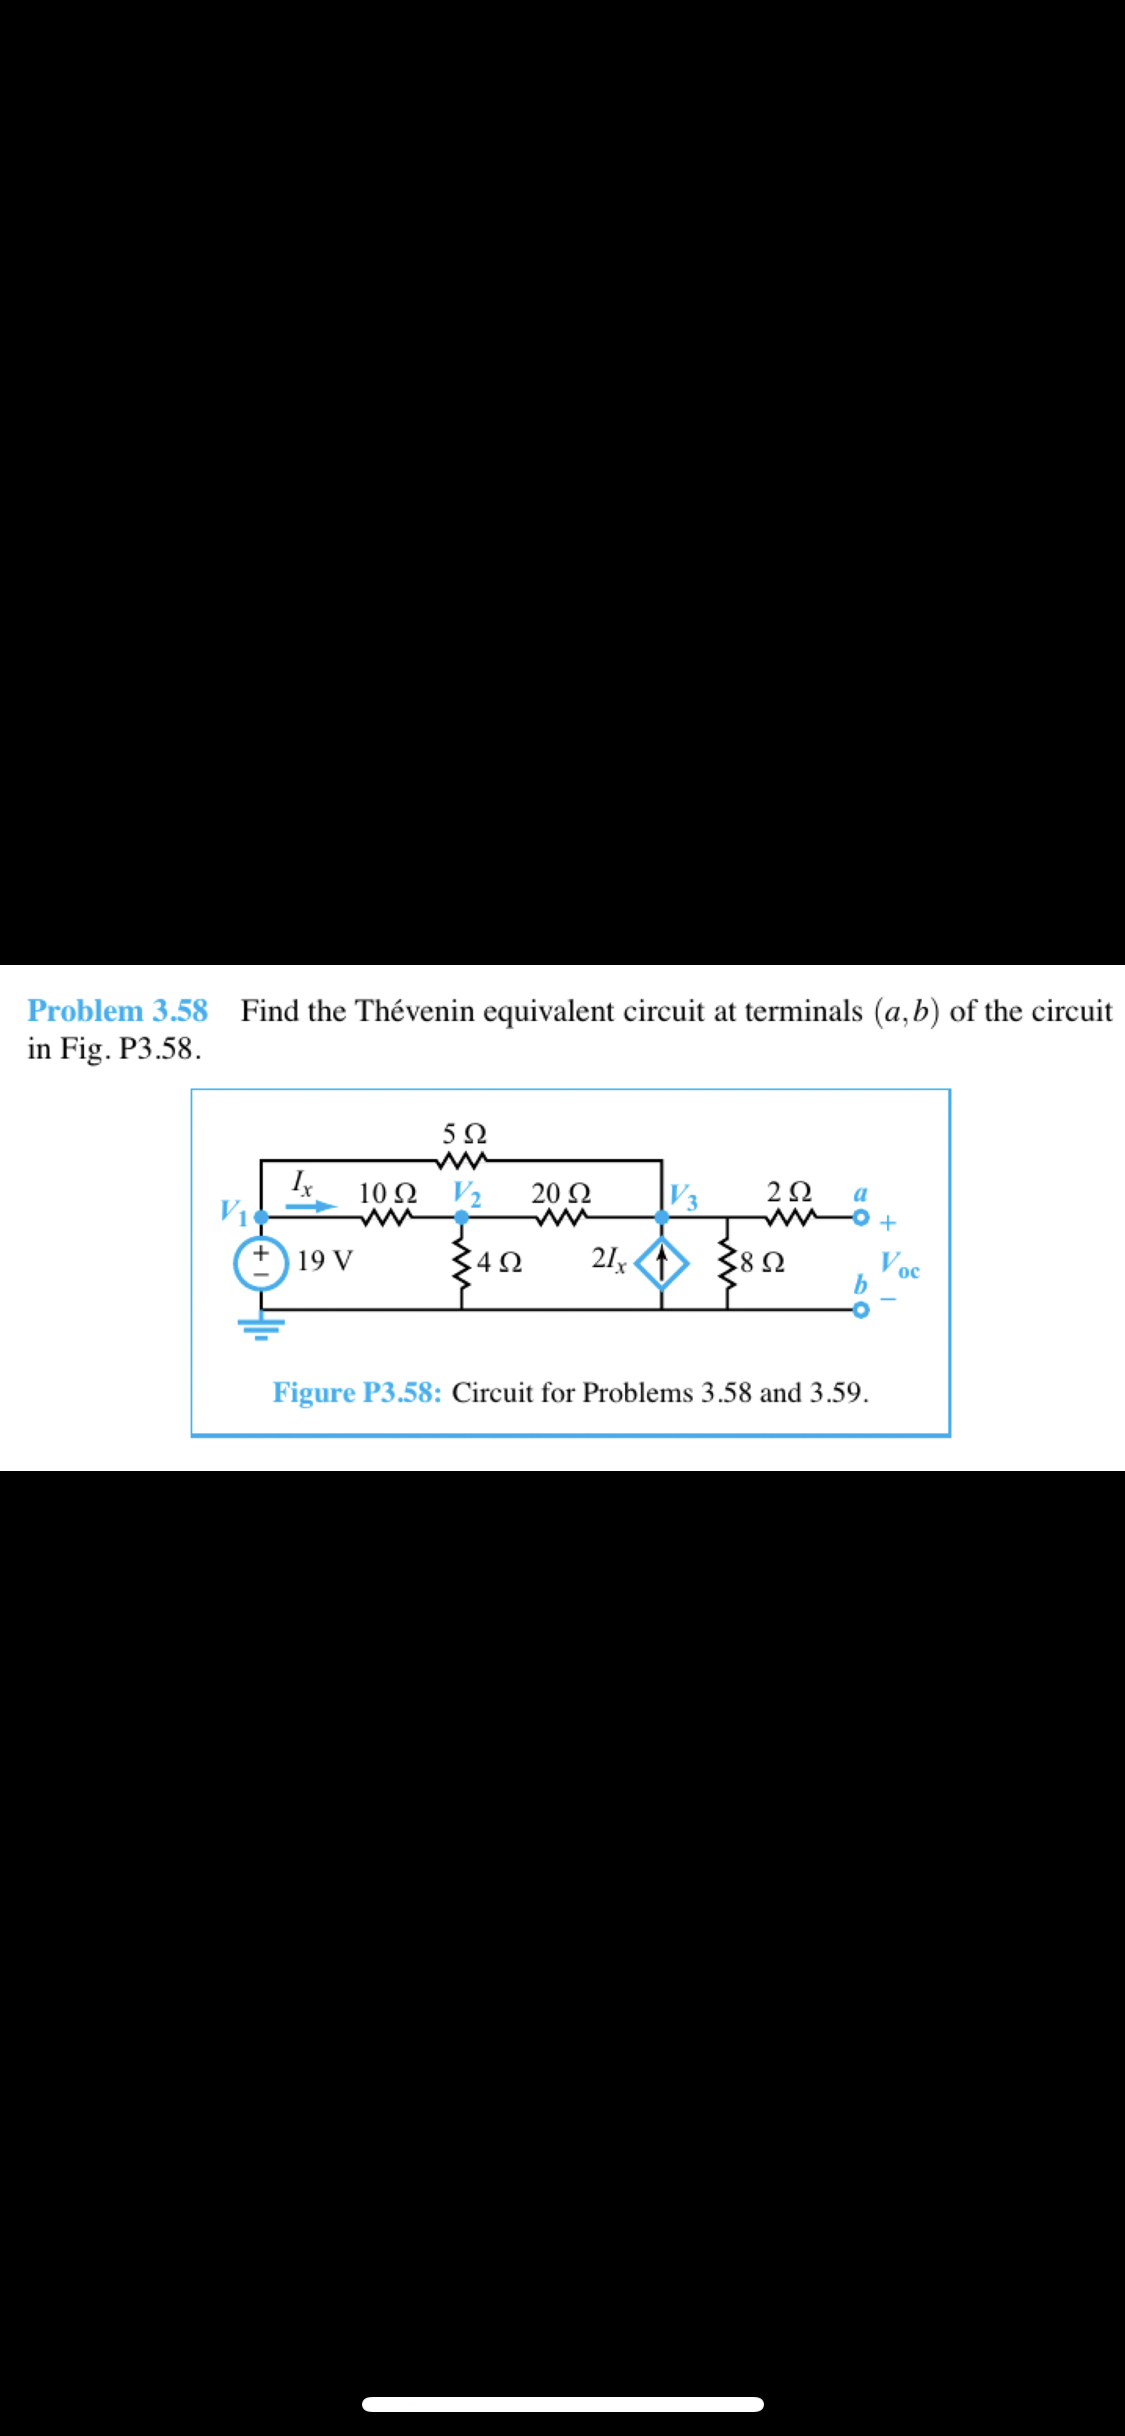 Problem 3.58
in Fig. P3.58.
Find the Thévenin equivalent circuit at terminals (a,b) of the circuit
Ix
10Ω V2
20 Ω
|V3
2Ω
342
21x <> 38SN
Voc
19 V
Figure P3.58: Circuit for Problems 3.58 and 3.59.
